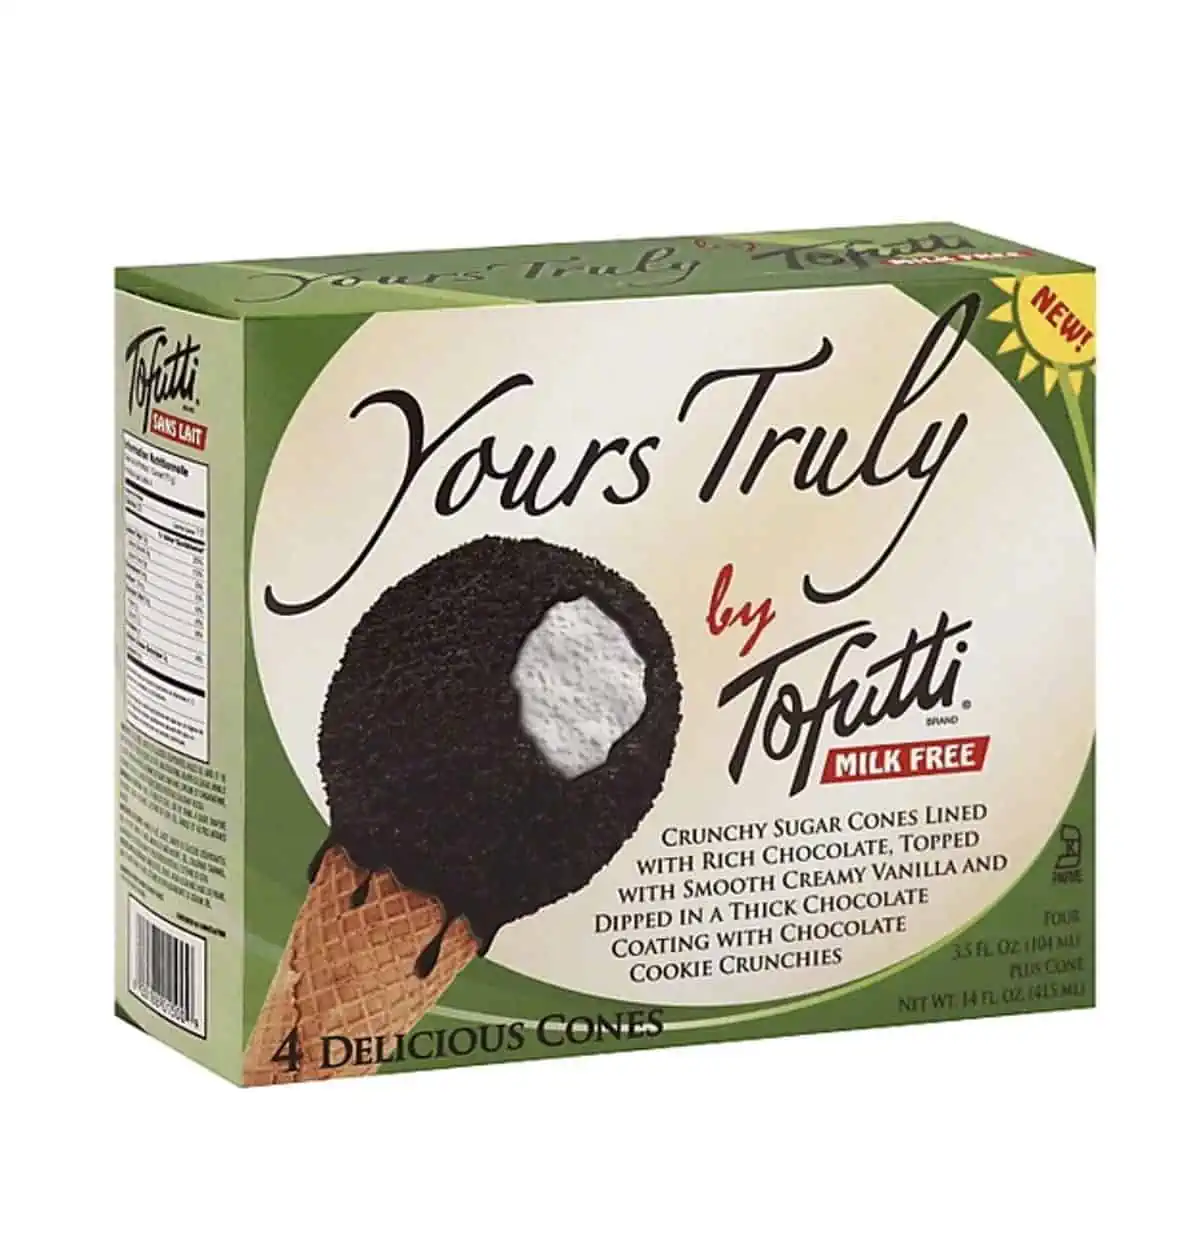 An unopened box of dairy-free kosher drumstick ice cream cones from the brand Tofutti.